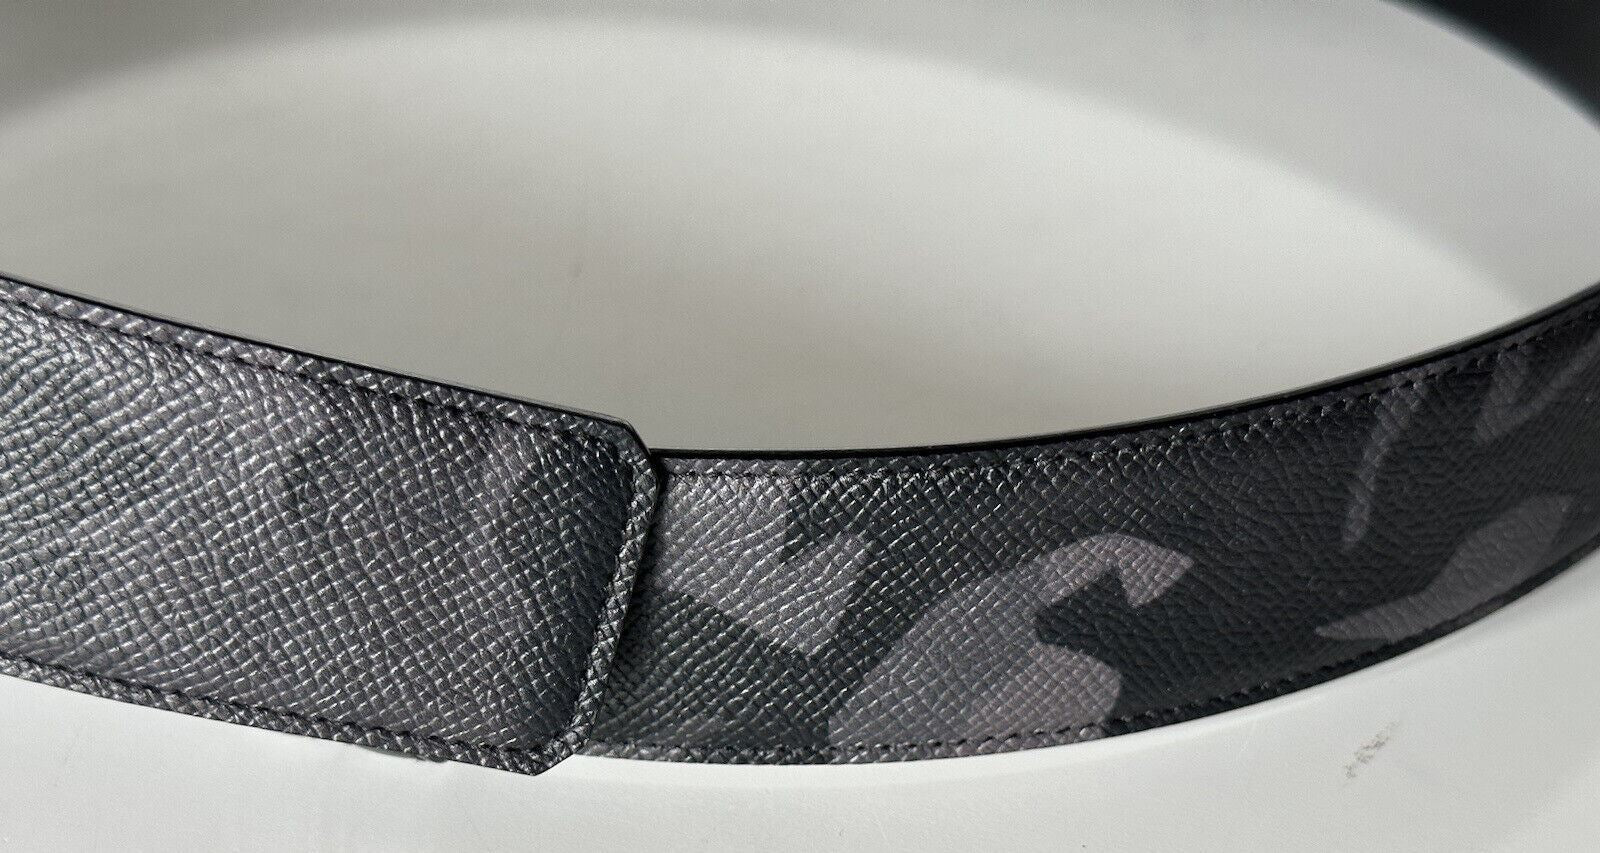 NWT $515 Bally Men's Double Sided B Chain Camouflage Belt 44/110 Italy 6301765